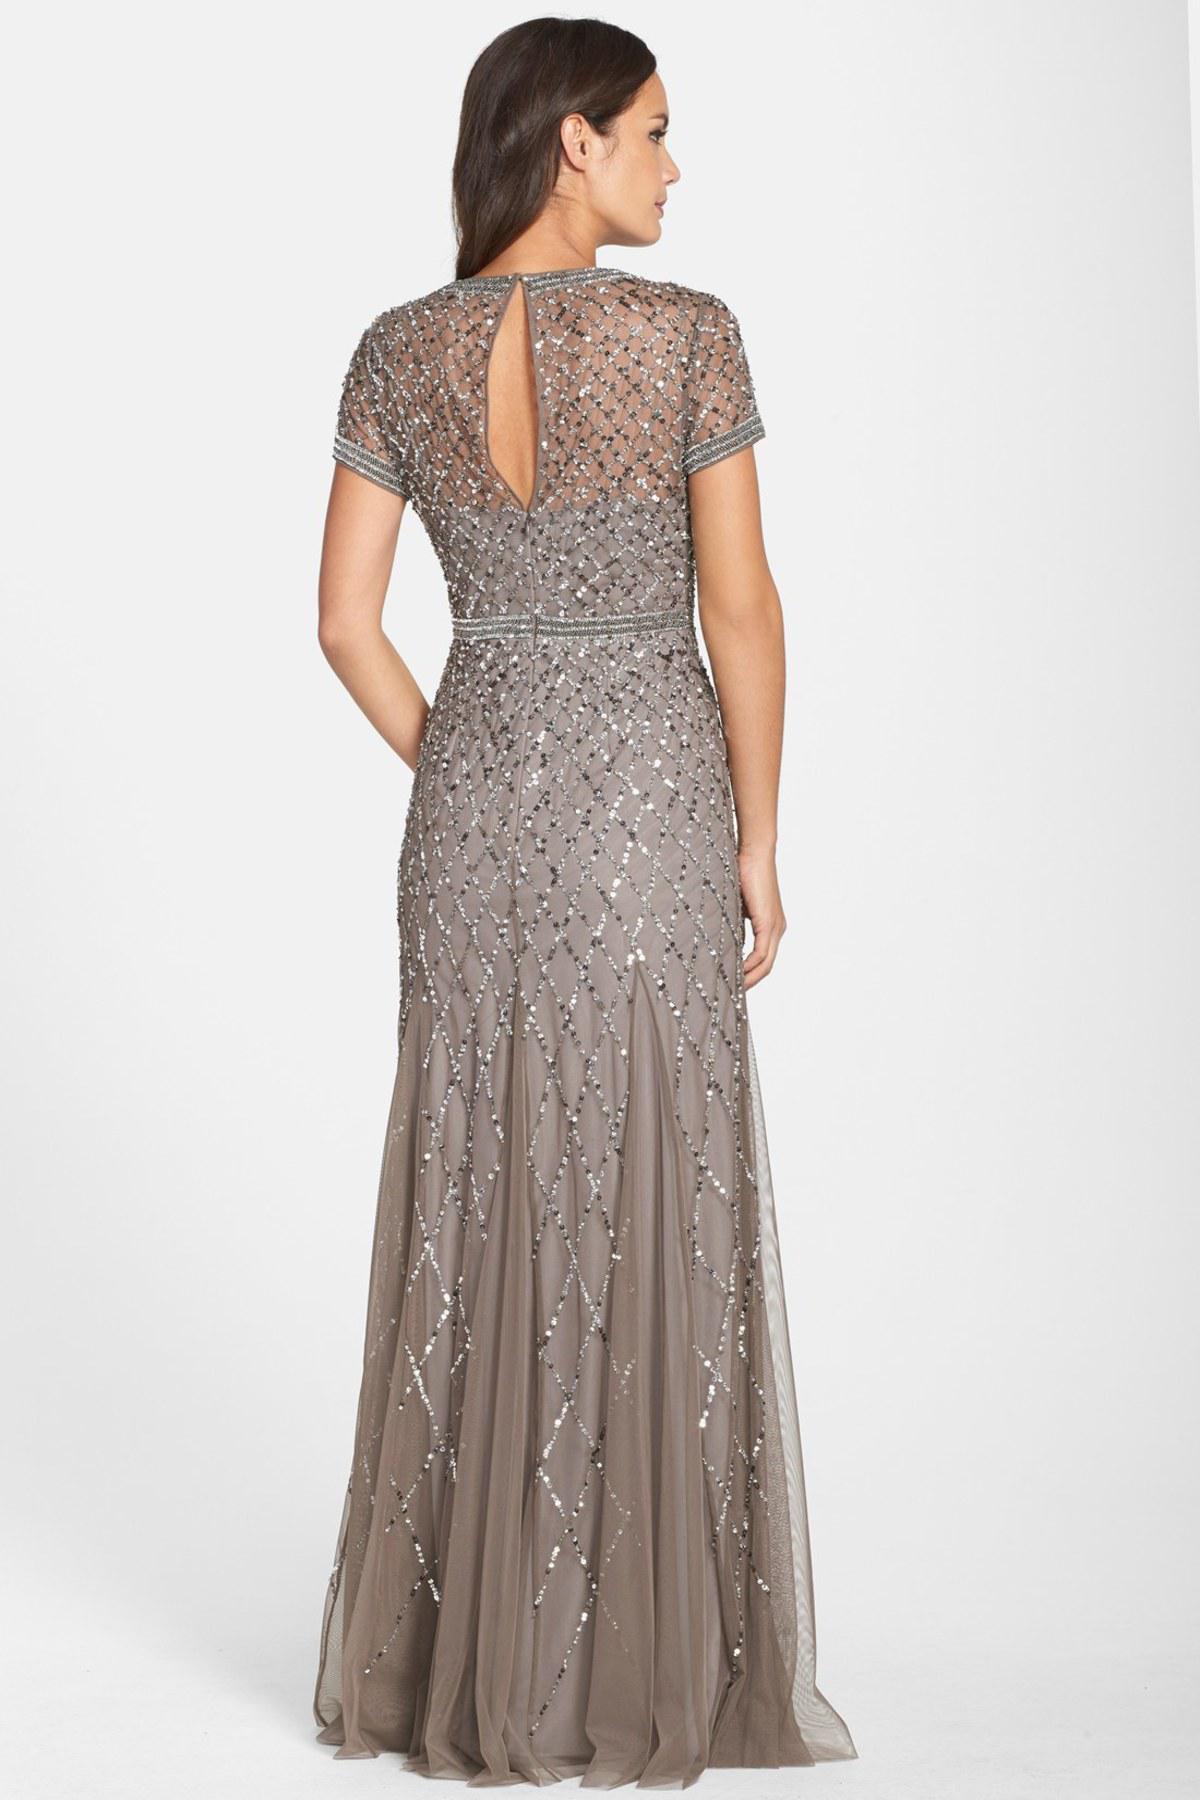 Lyst - Adrianna Papell Beaded Mesh Gown in Gray